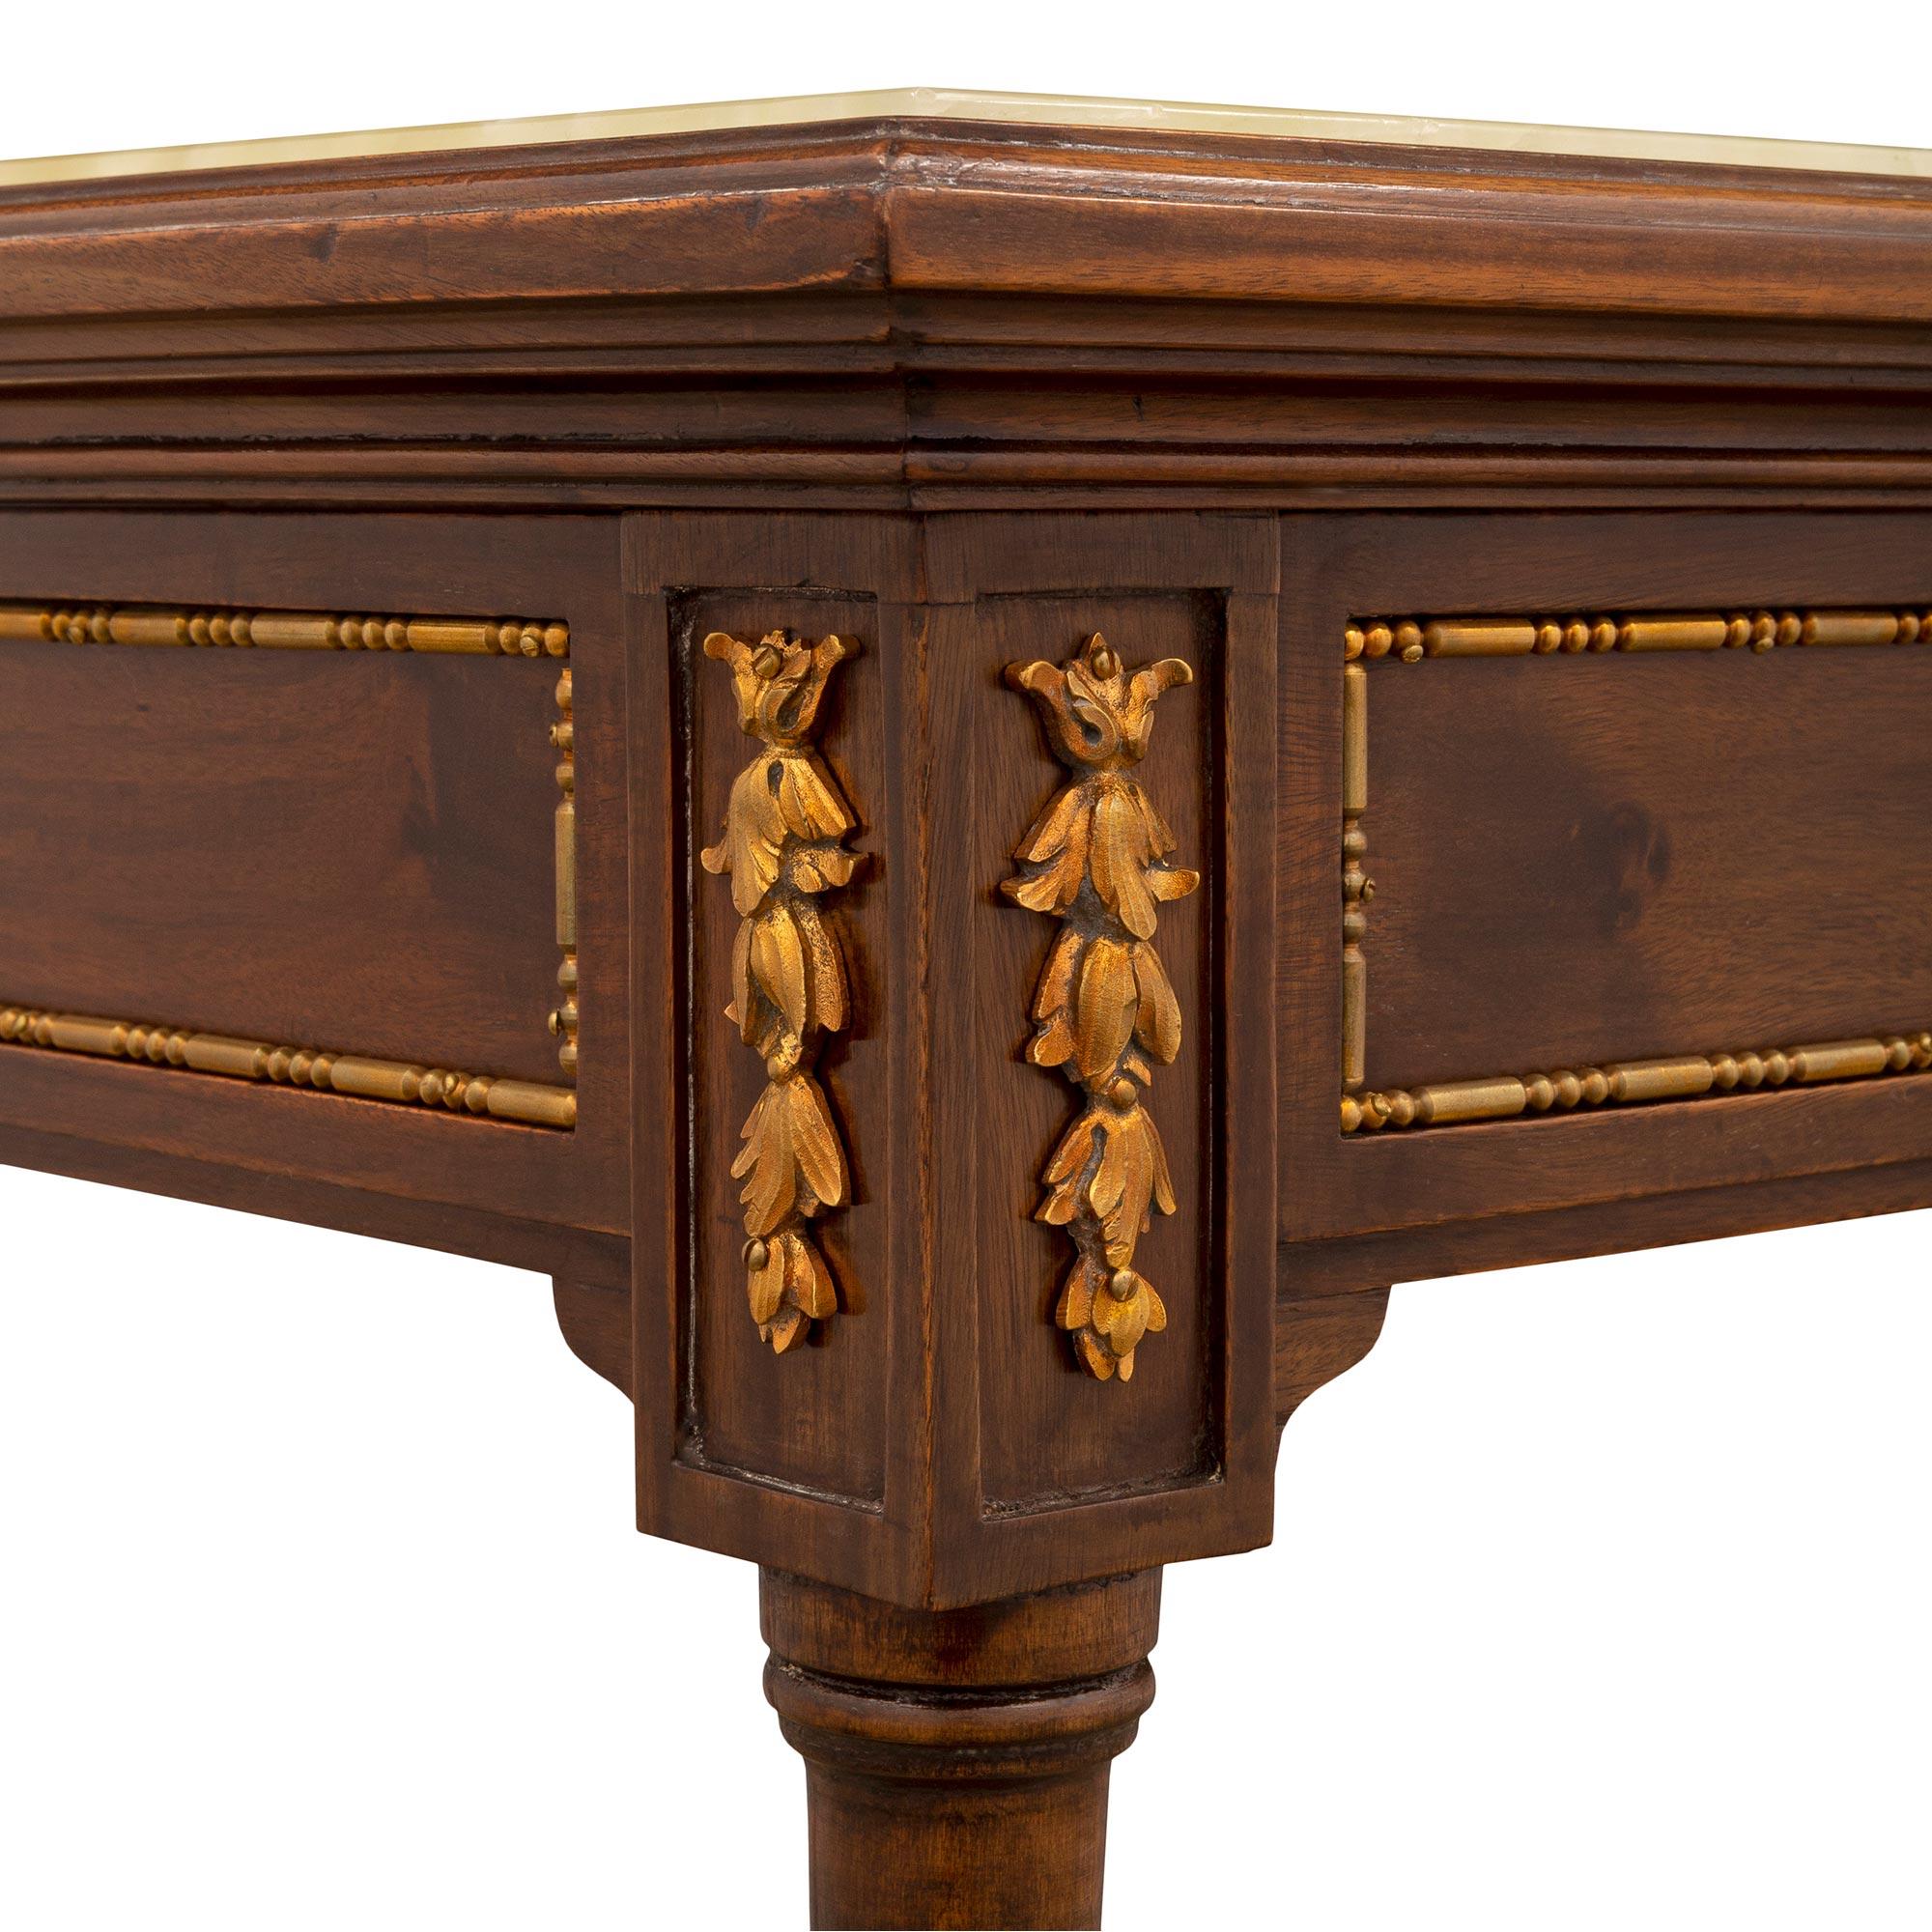 French 19th Century Louis XVI Style Mahogany, Onyx and Ormolu Table For Sale 3